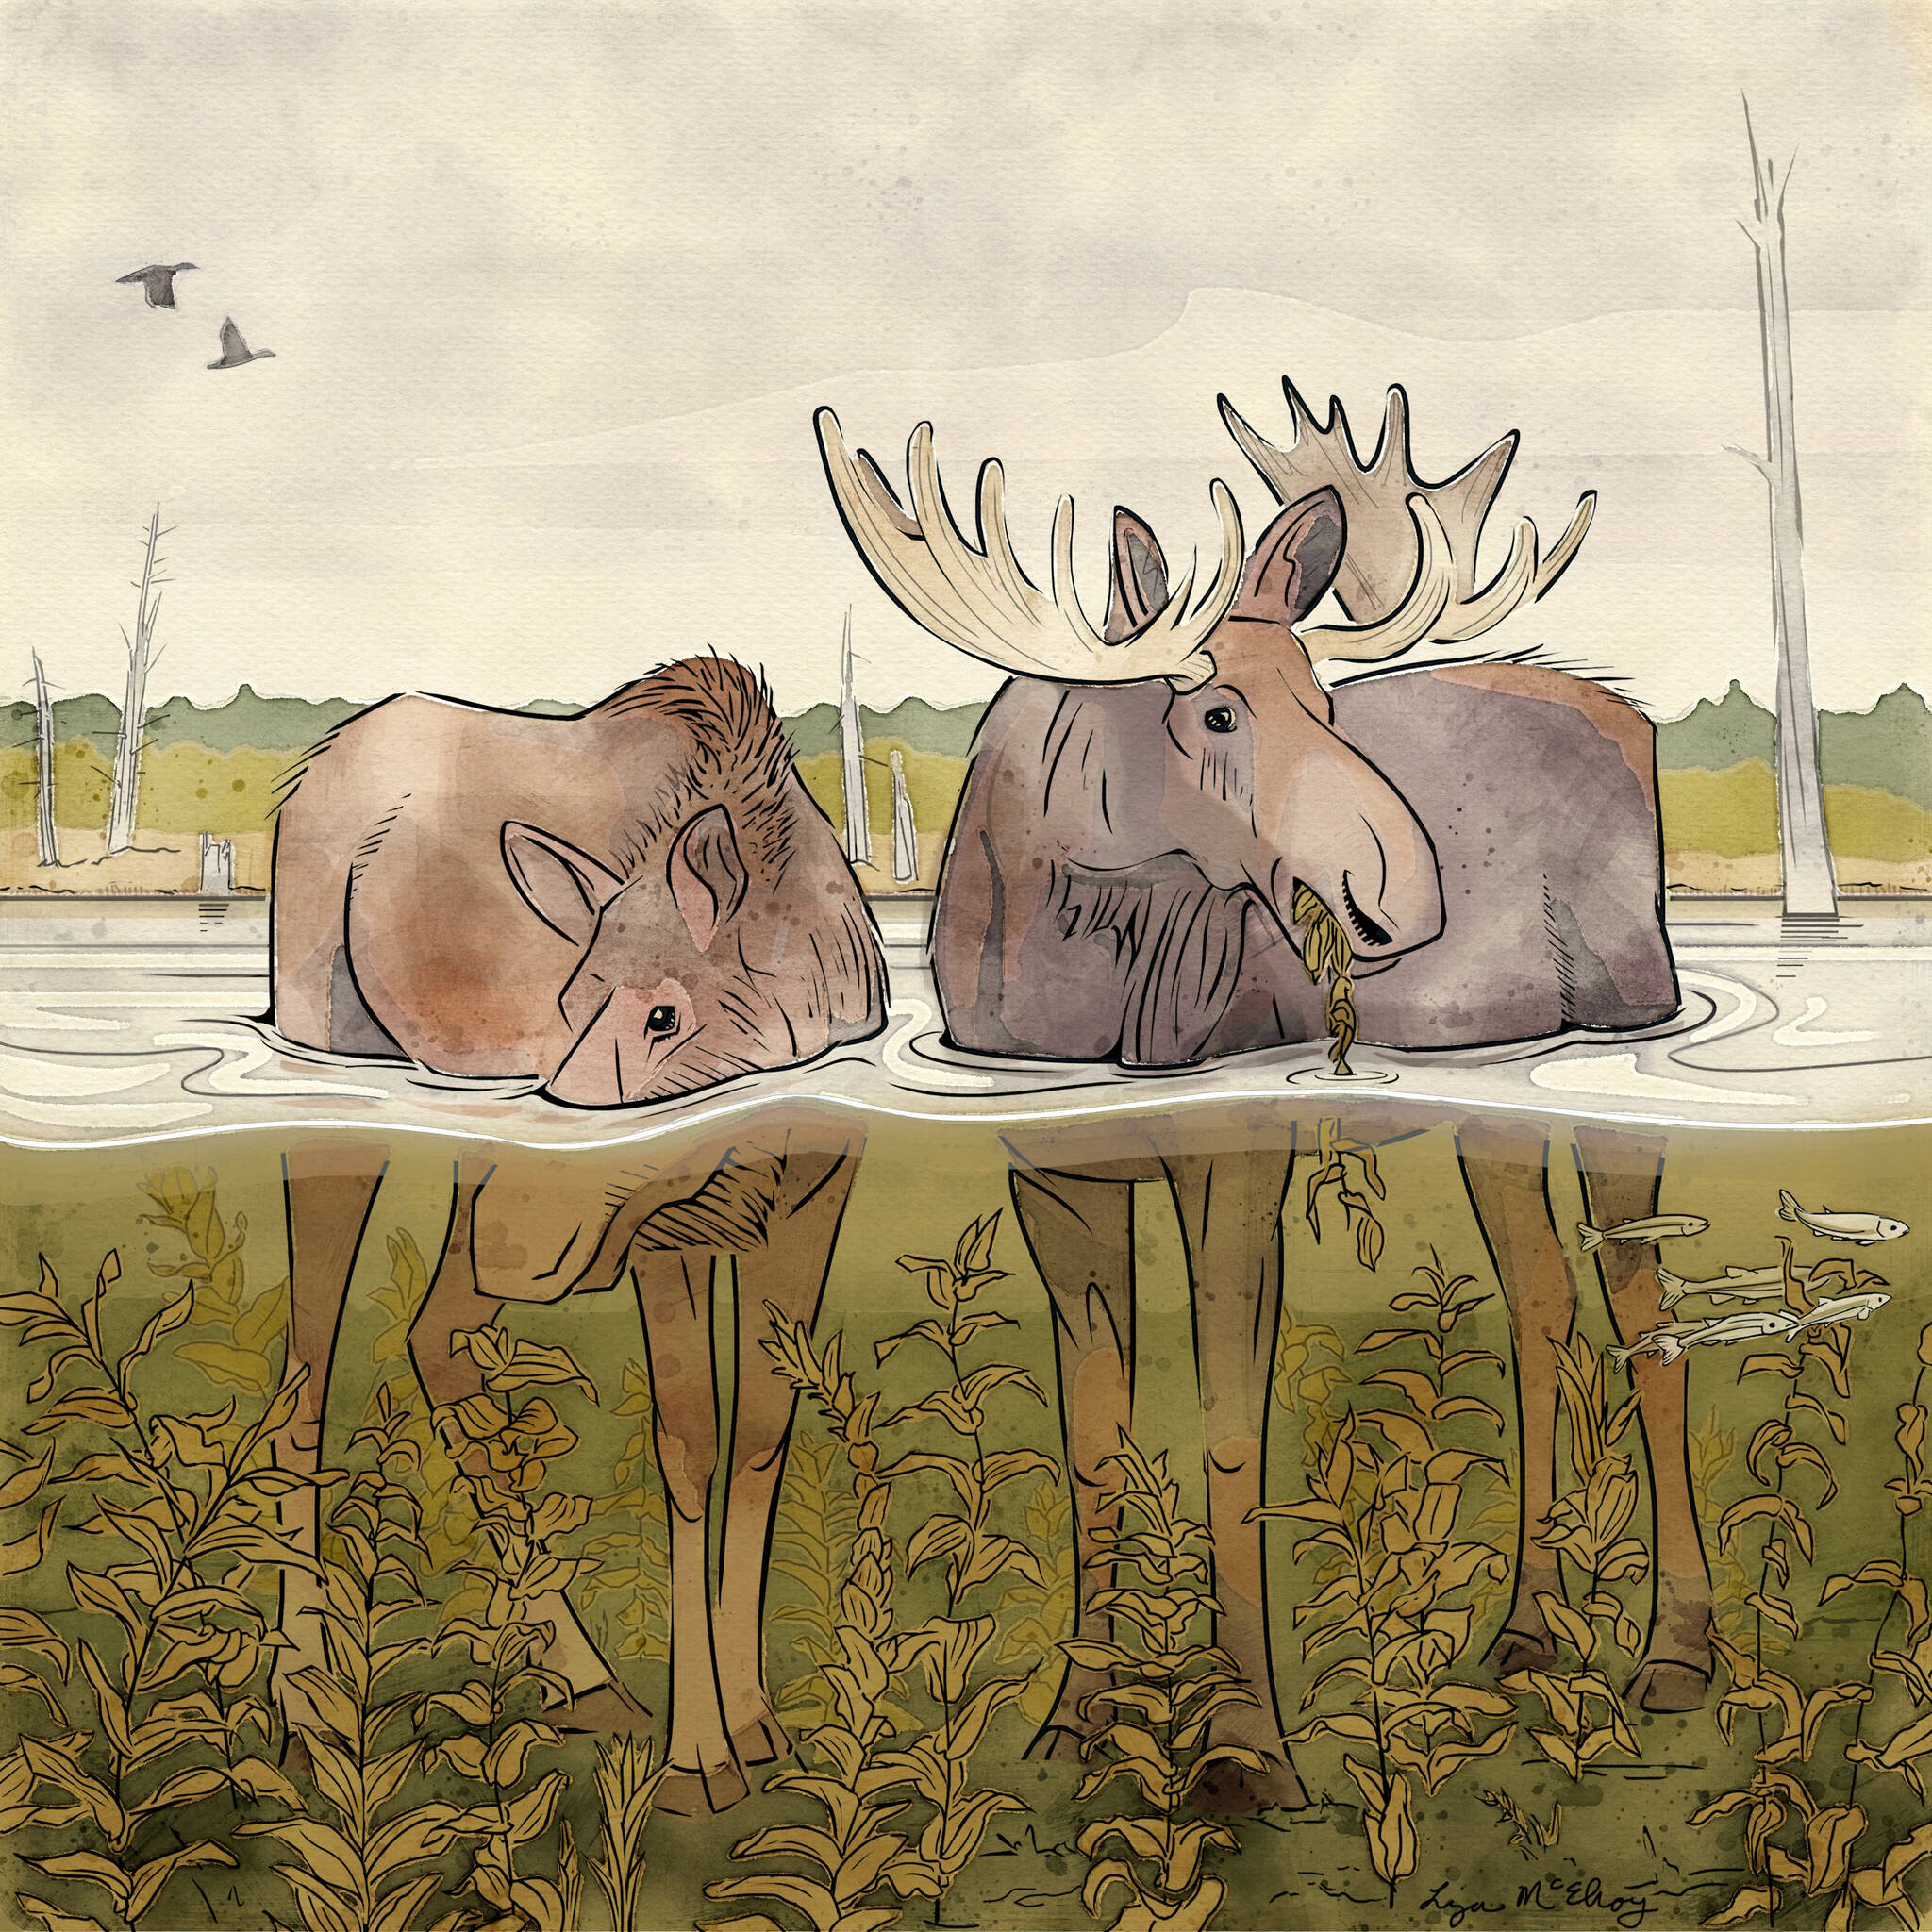 Courtesy Image / Liza McElroy
Artist Liza McElroy of Seward, Alaska, recently sketched two moose in their summertime aquatic environment to illustrate this story.